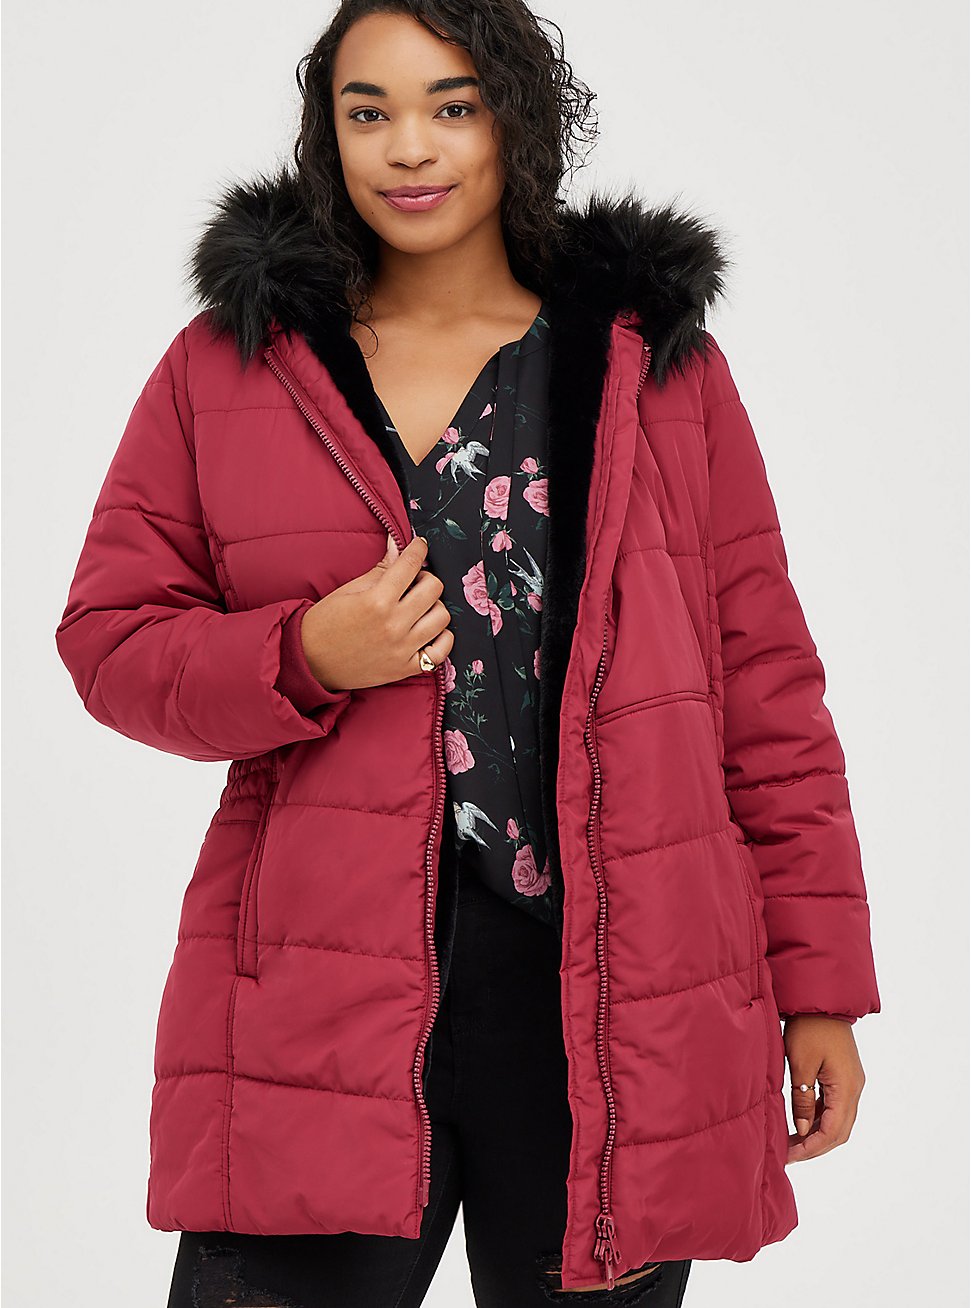 Fit & Flare Puffer Jacket - Deep Red with Black Trim, RED, hi-res